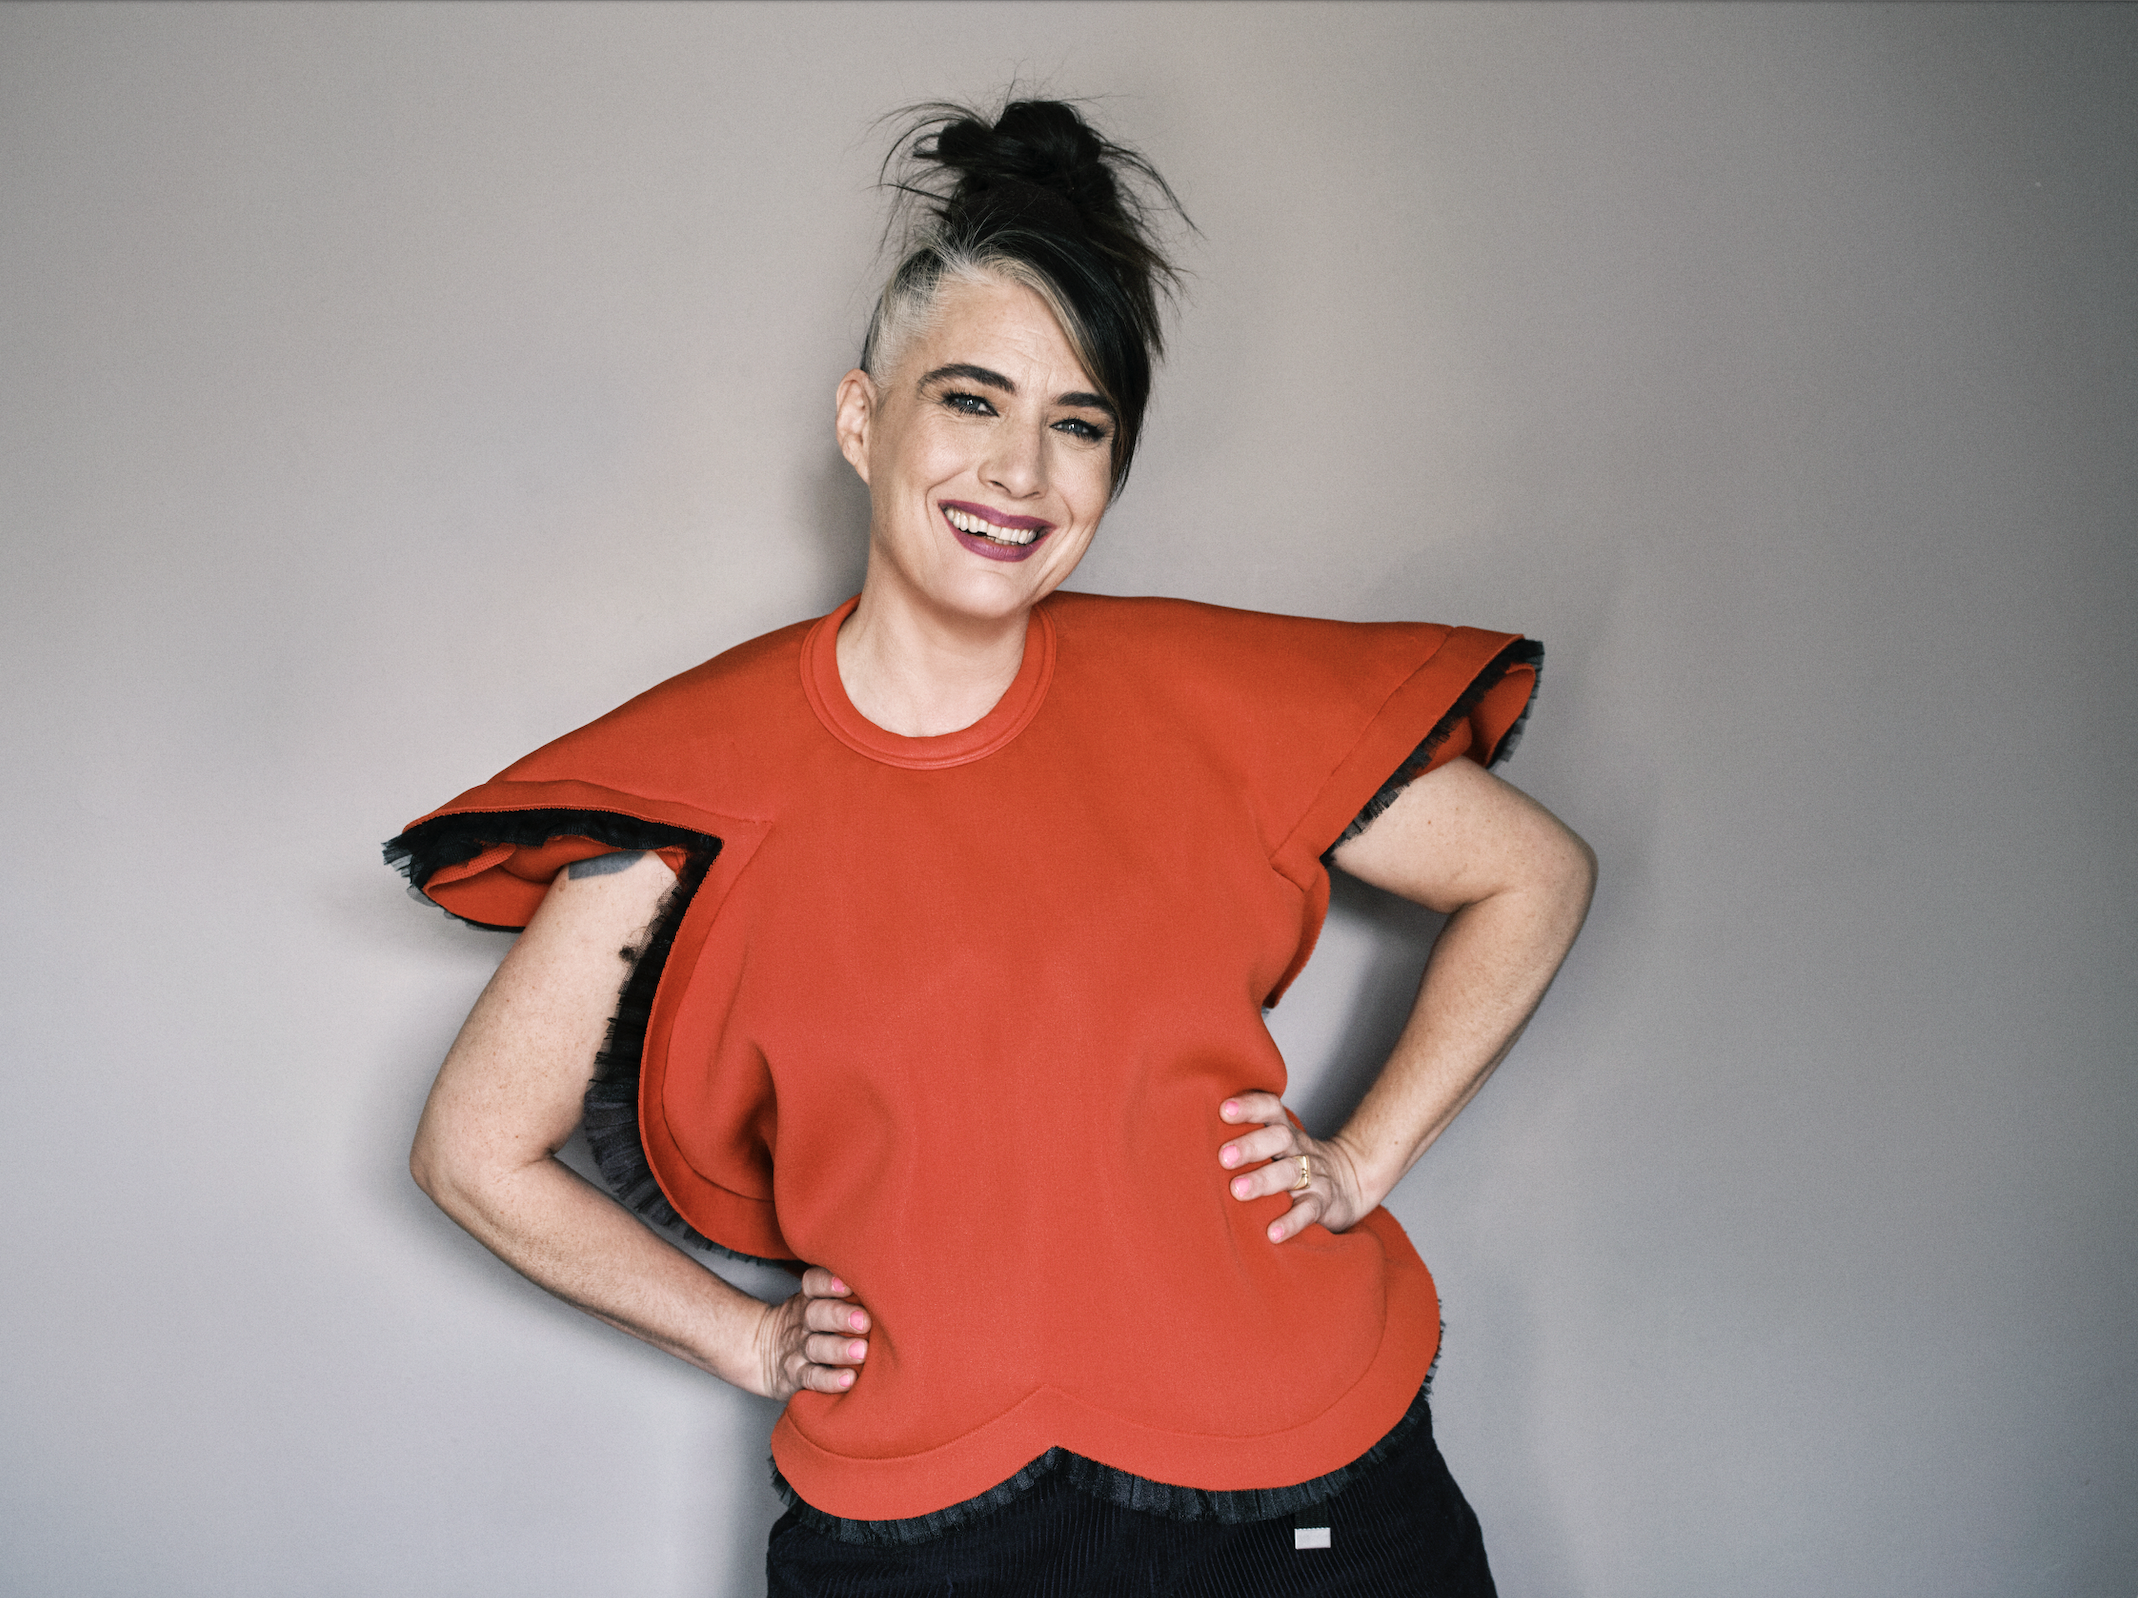 Sexism, Feminism, and the Movement: Kathleen Hanna Doesn’t Hold Back in New Memoir